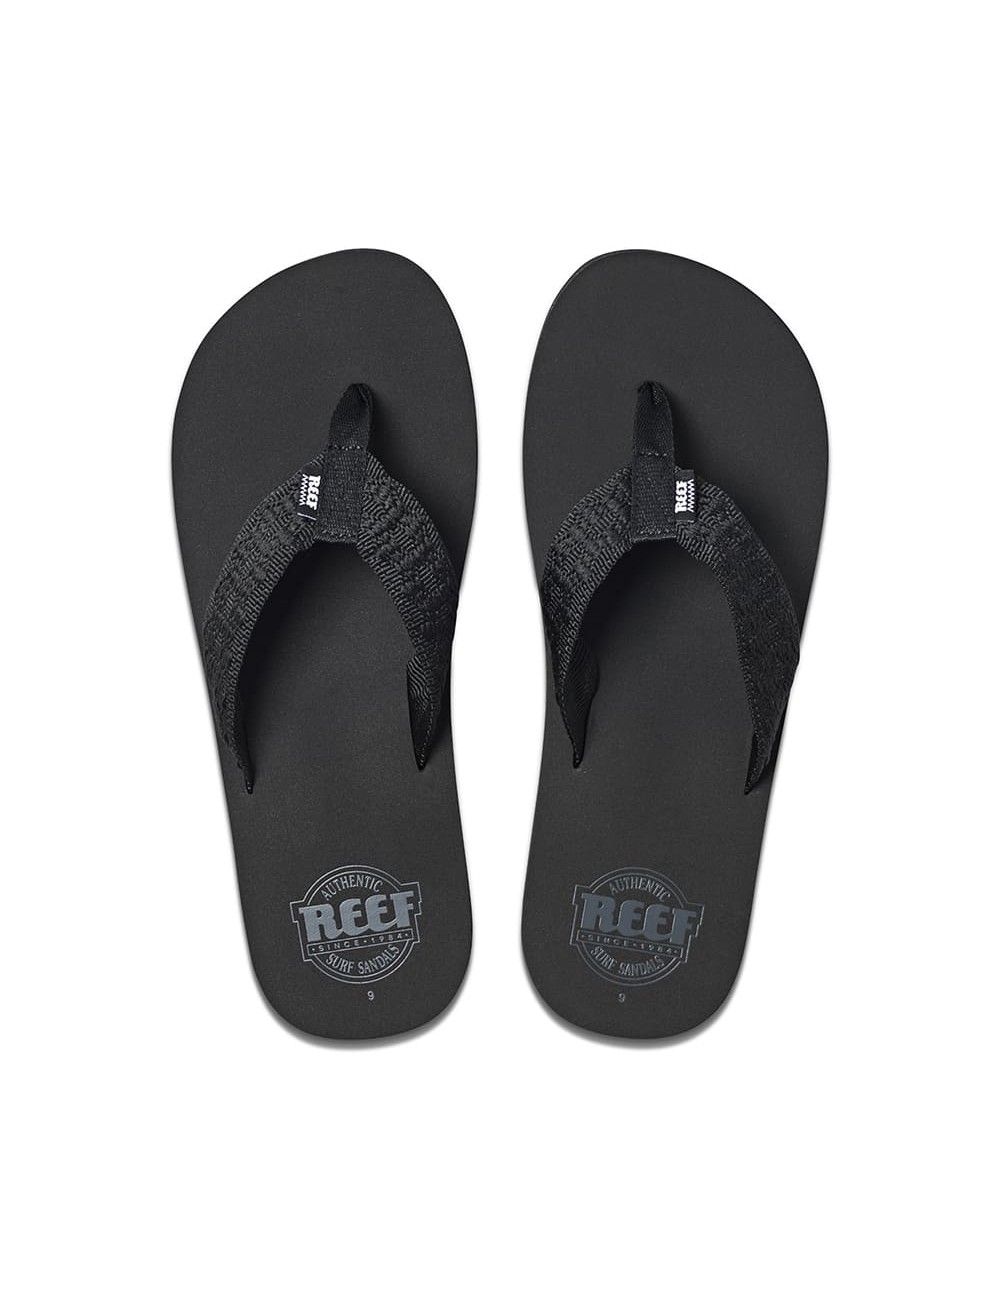 Chanclas Reef Smoothy